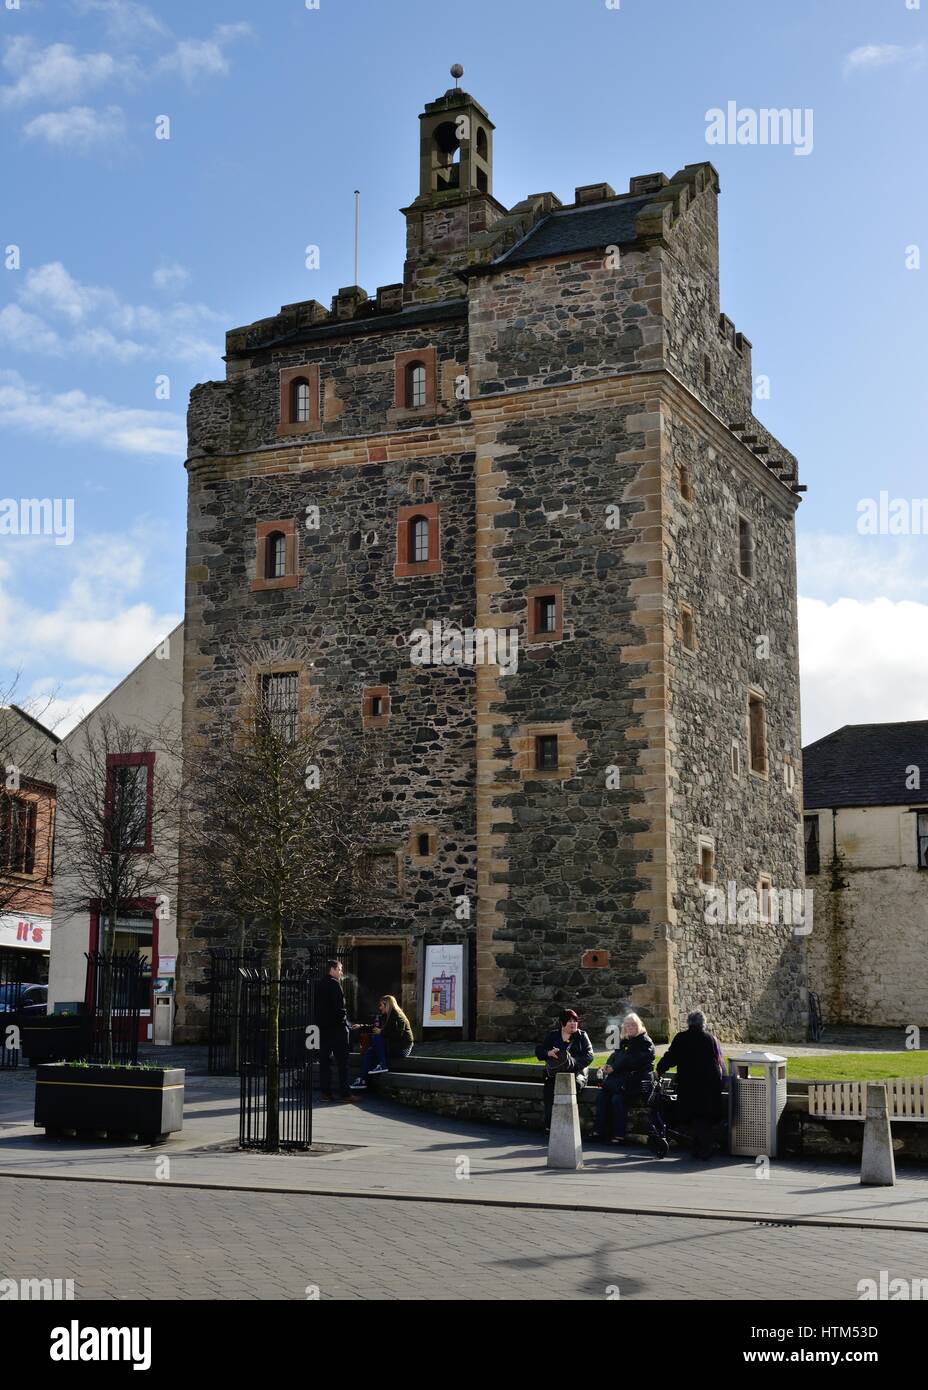 Medieval tower house in Stranraer town centre, Dumfries and Galloway, Scotland, UK Stock Photo